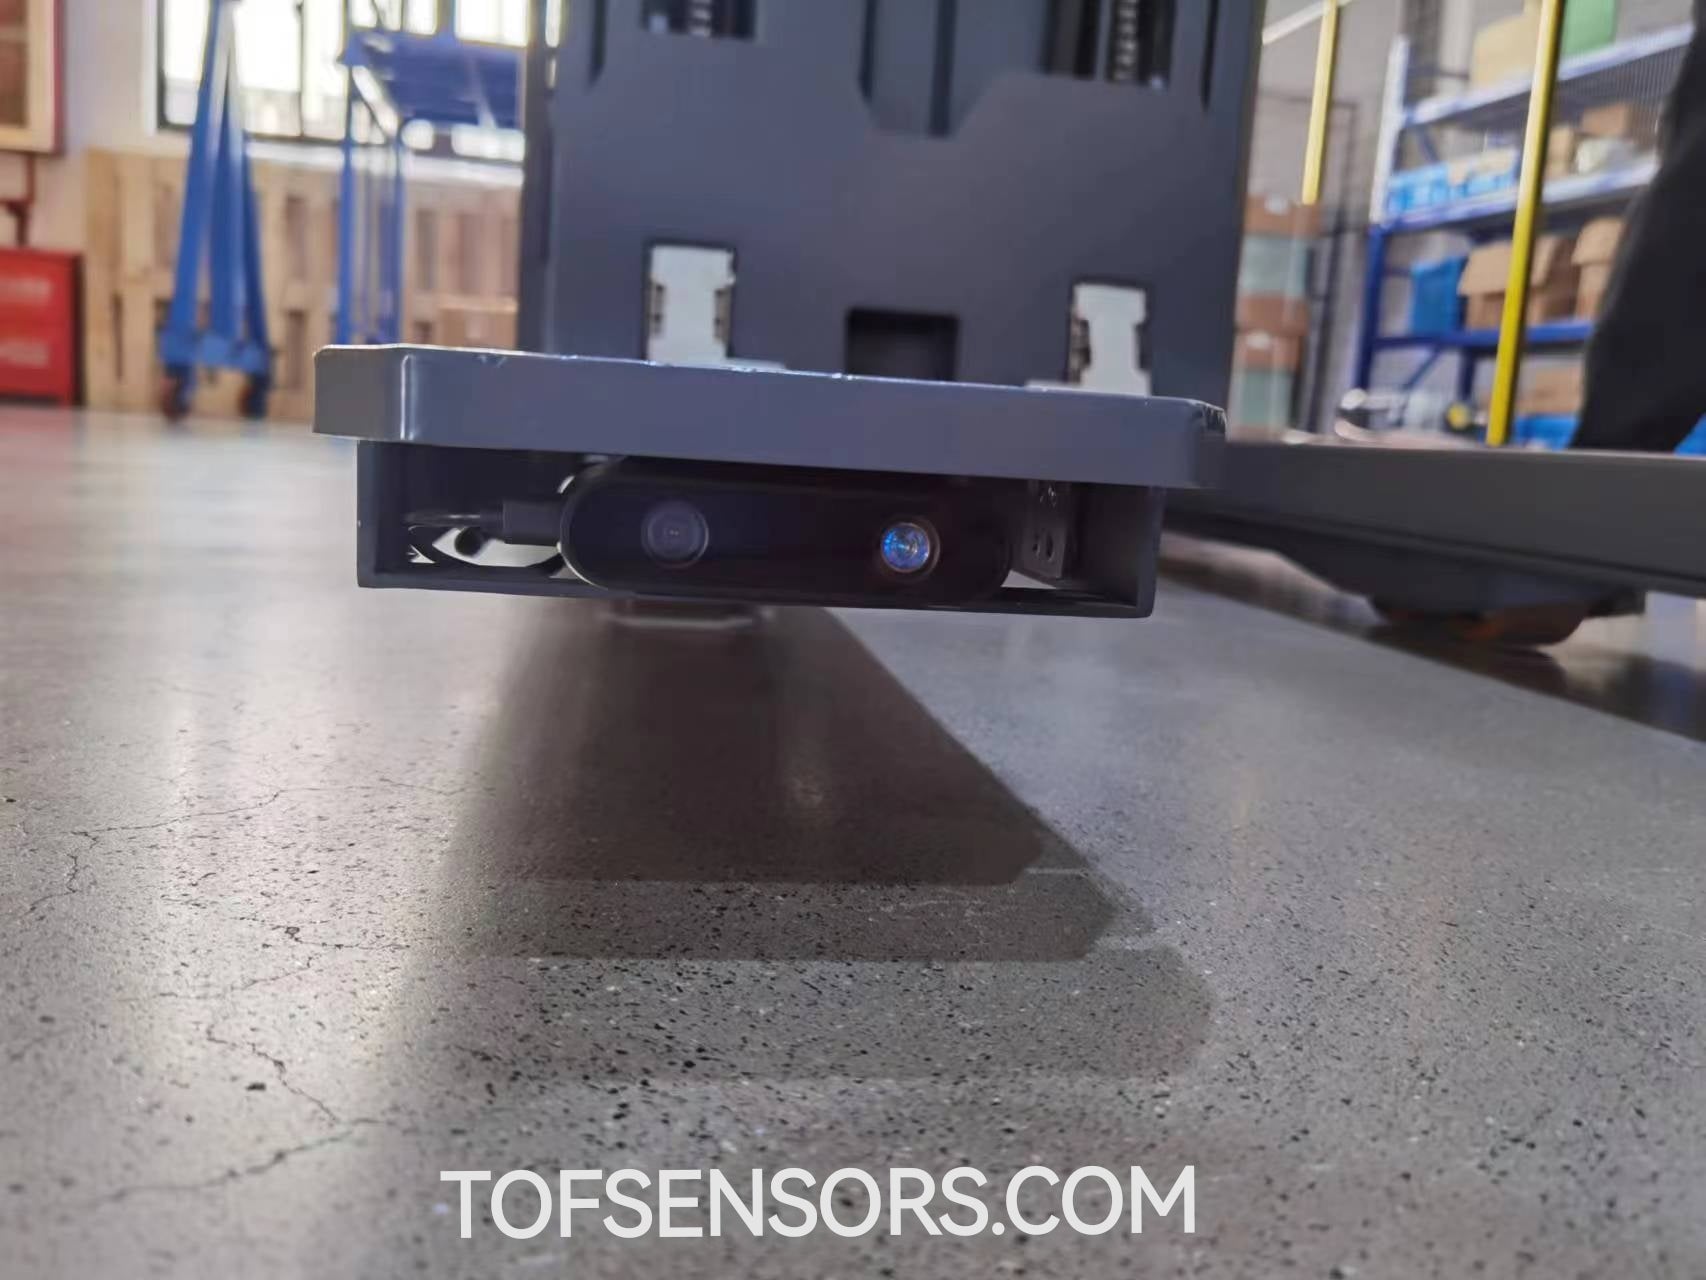 The importance of TOF sensors   in industrial robotics and automation